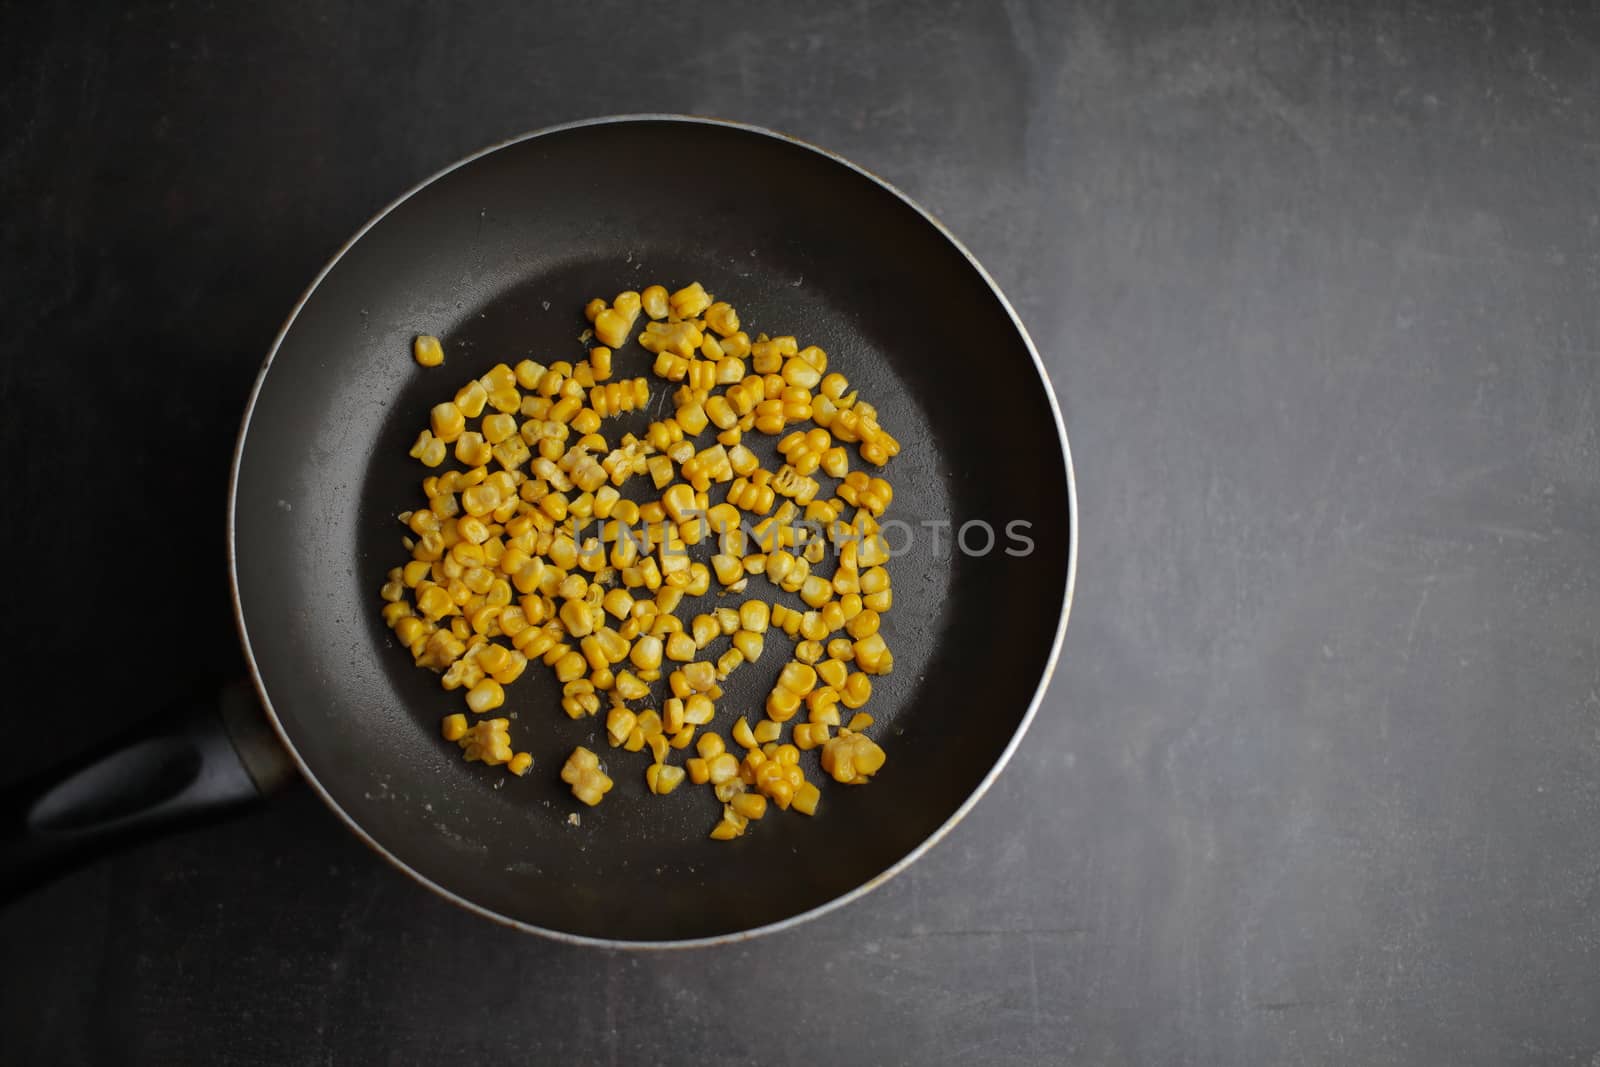 Diet. Organic Grilled Corn in a frying pan. Organic farm vegetables. Gray background Top view. Vegetarian food. Environmentally friendly products